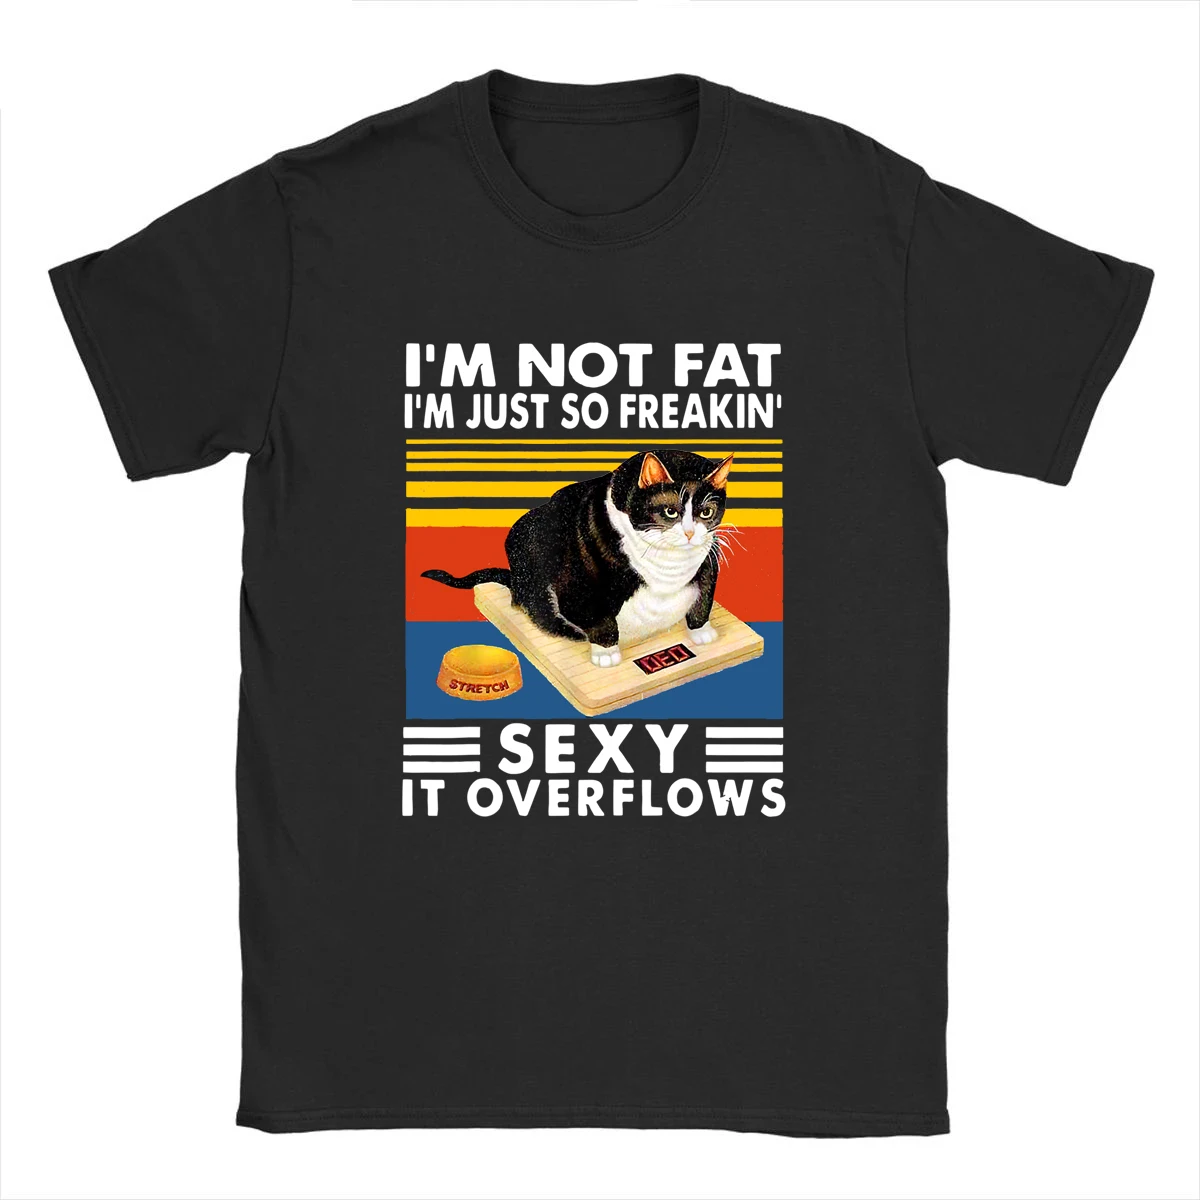 

I'm Not Fat I'm Just So Freakin' Sexy It Overflows Funny Cat T Shirts Men Cat Lover Cotton Short Sleeve Oversized TShirt Women